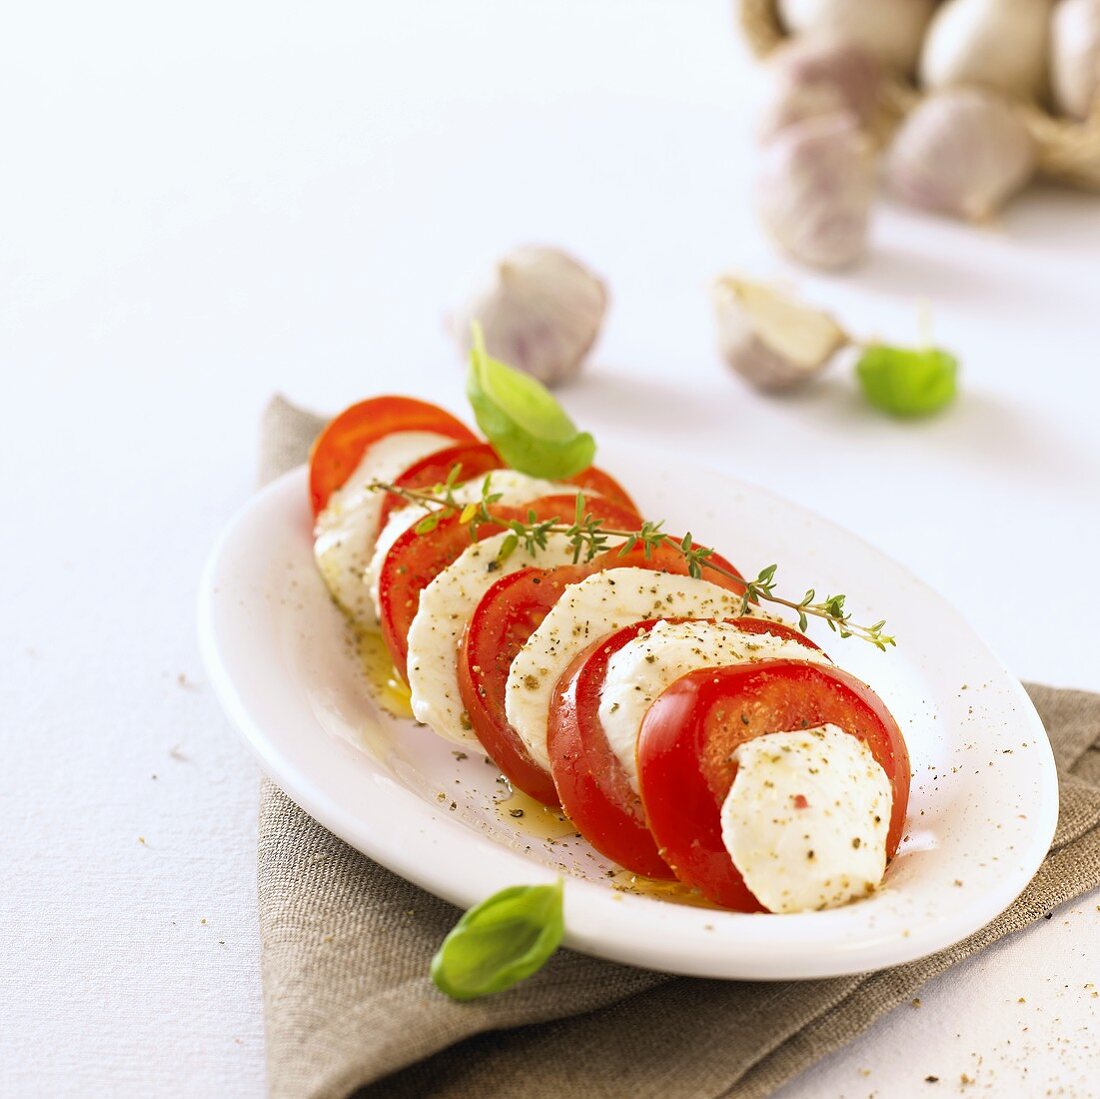 Tomato and mozzarella with herbs on a platter